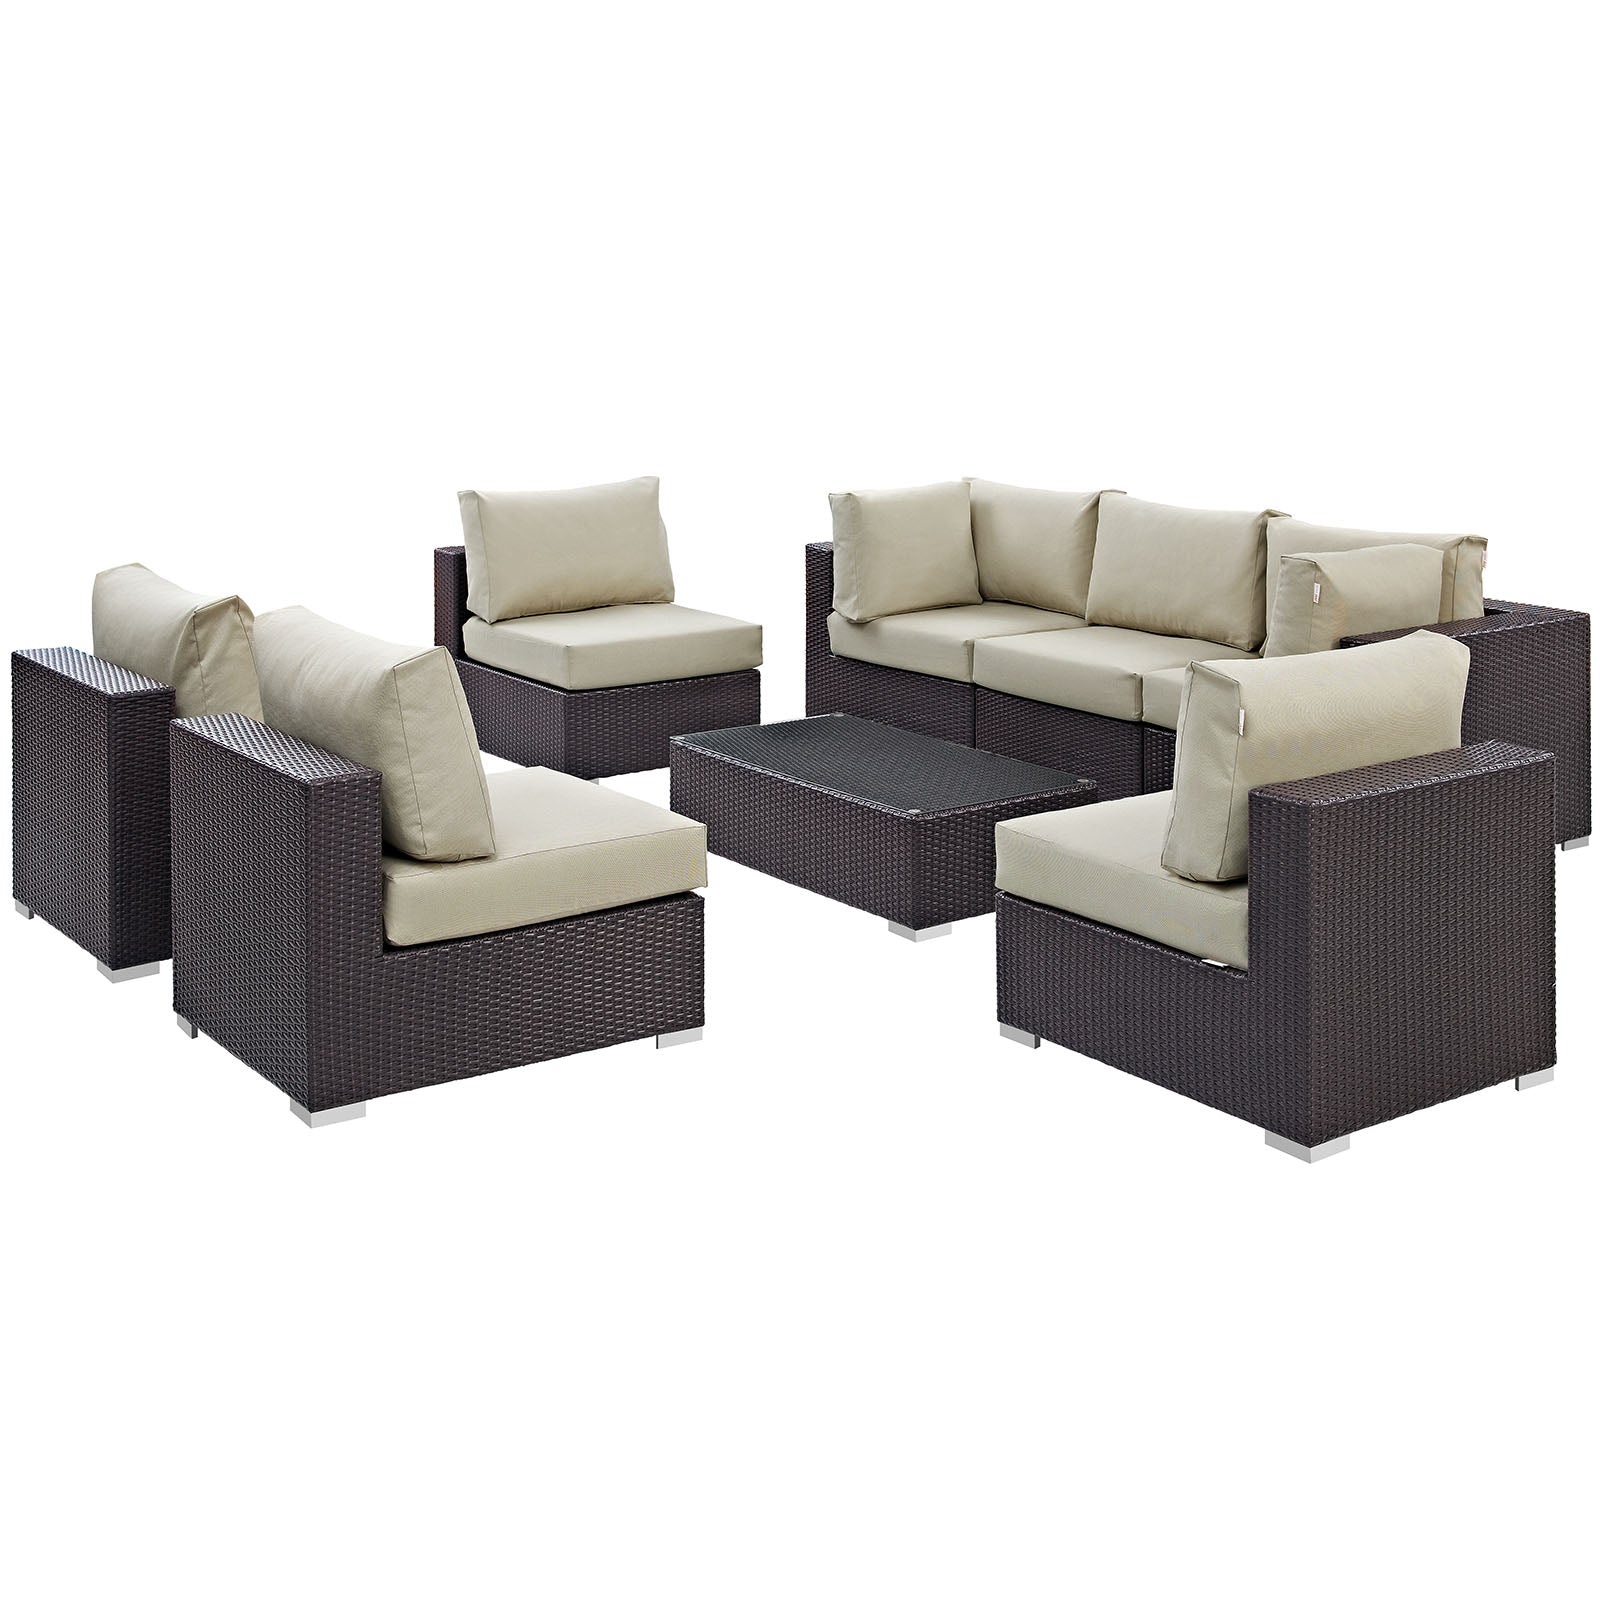 Convene 8 Piece Outdoor Patio Sectional Set W/ Coffee Table